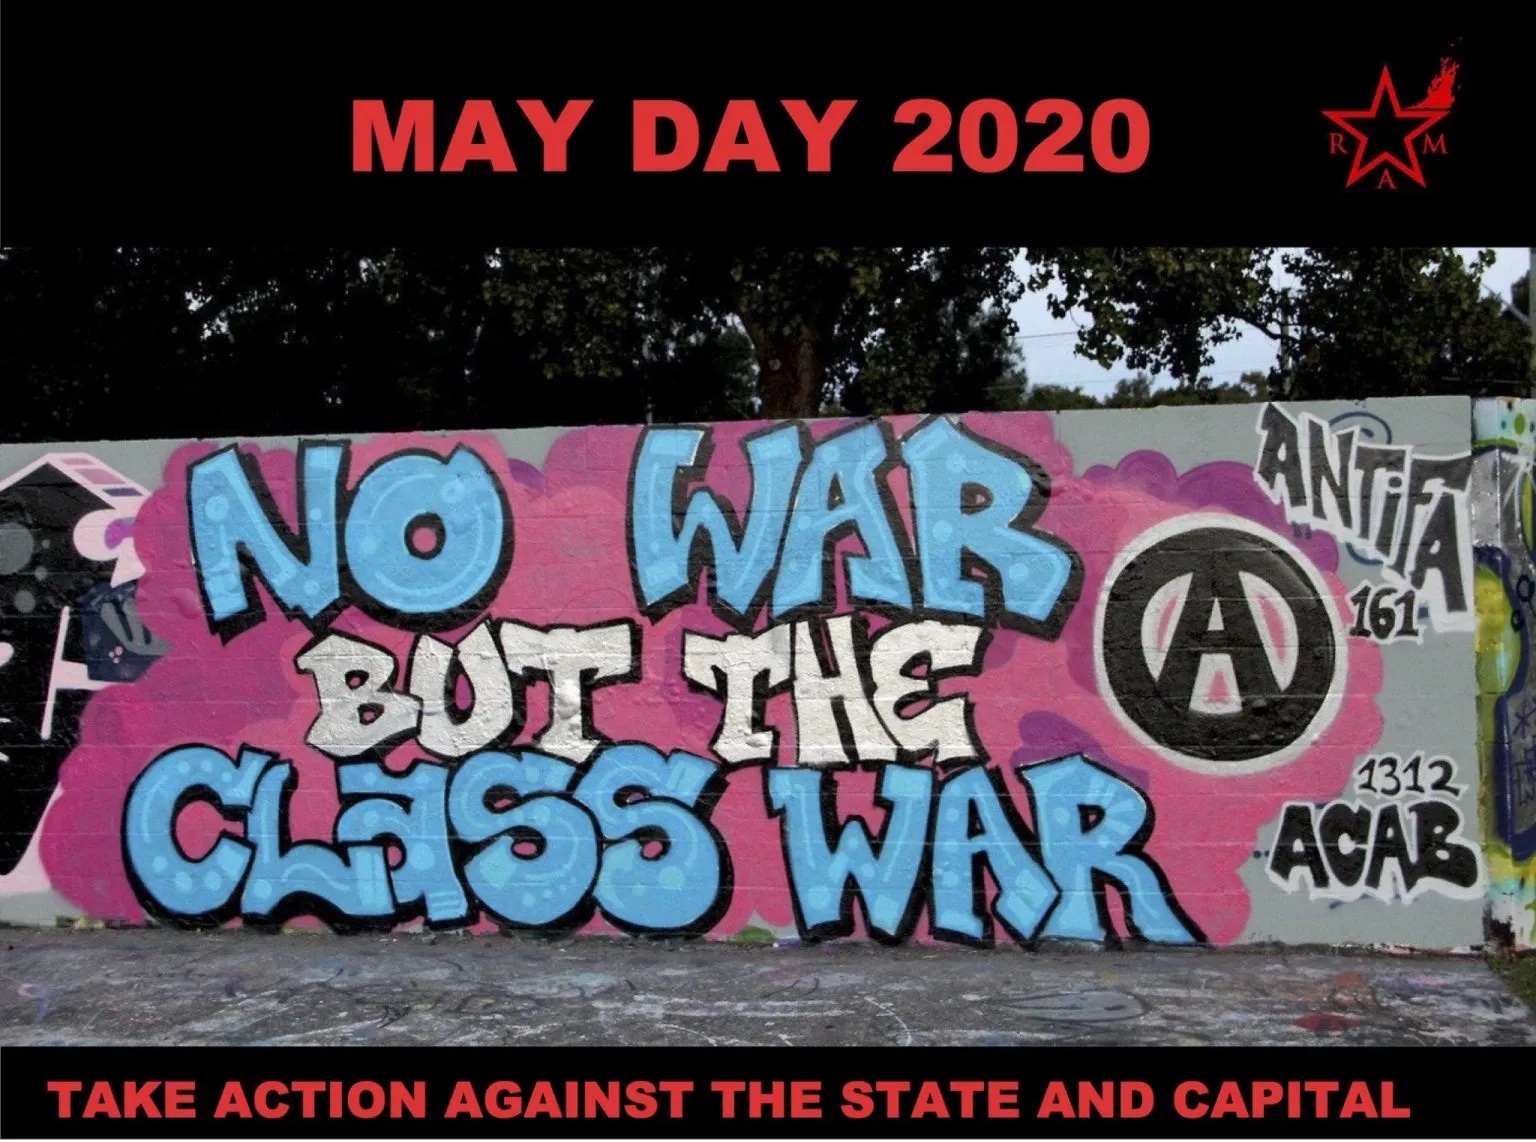 Call for autonomous action on #MayDay